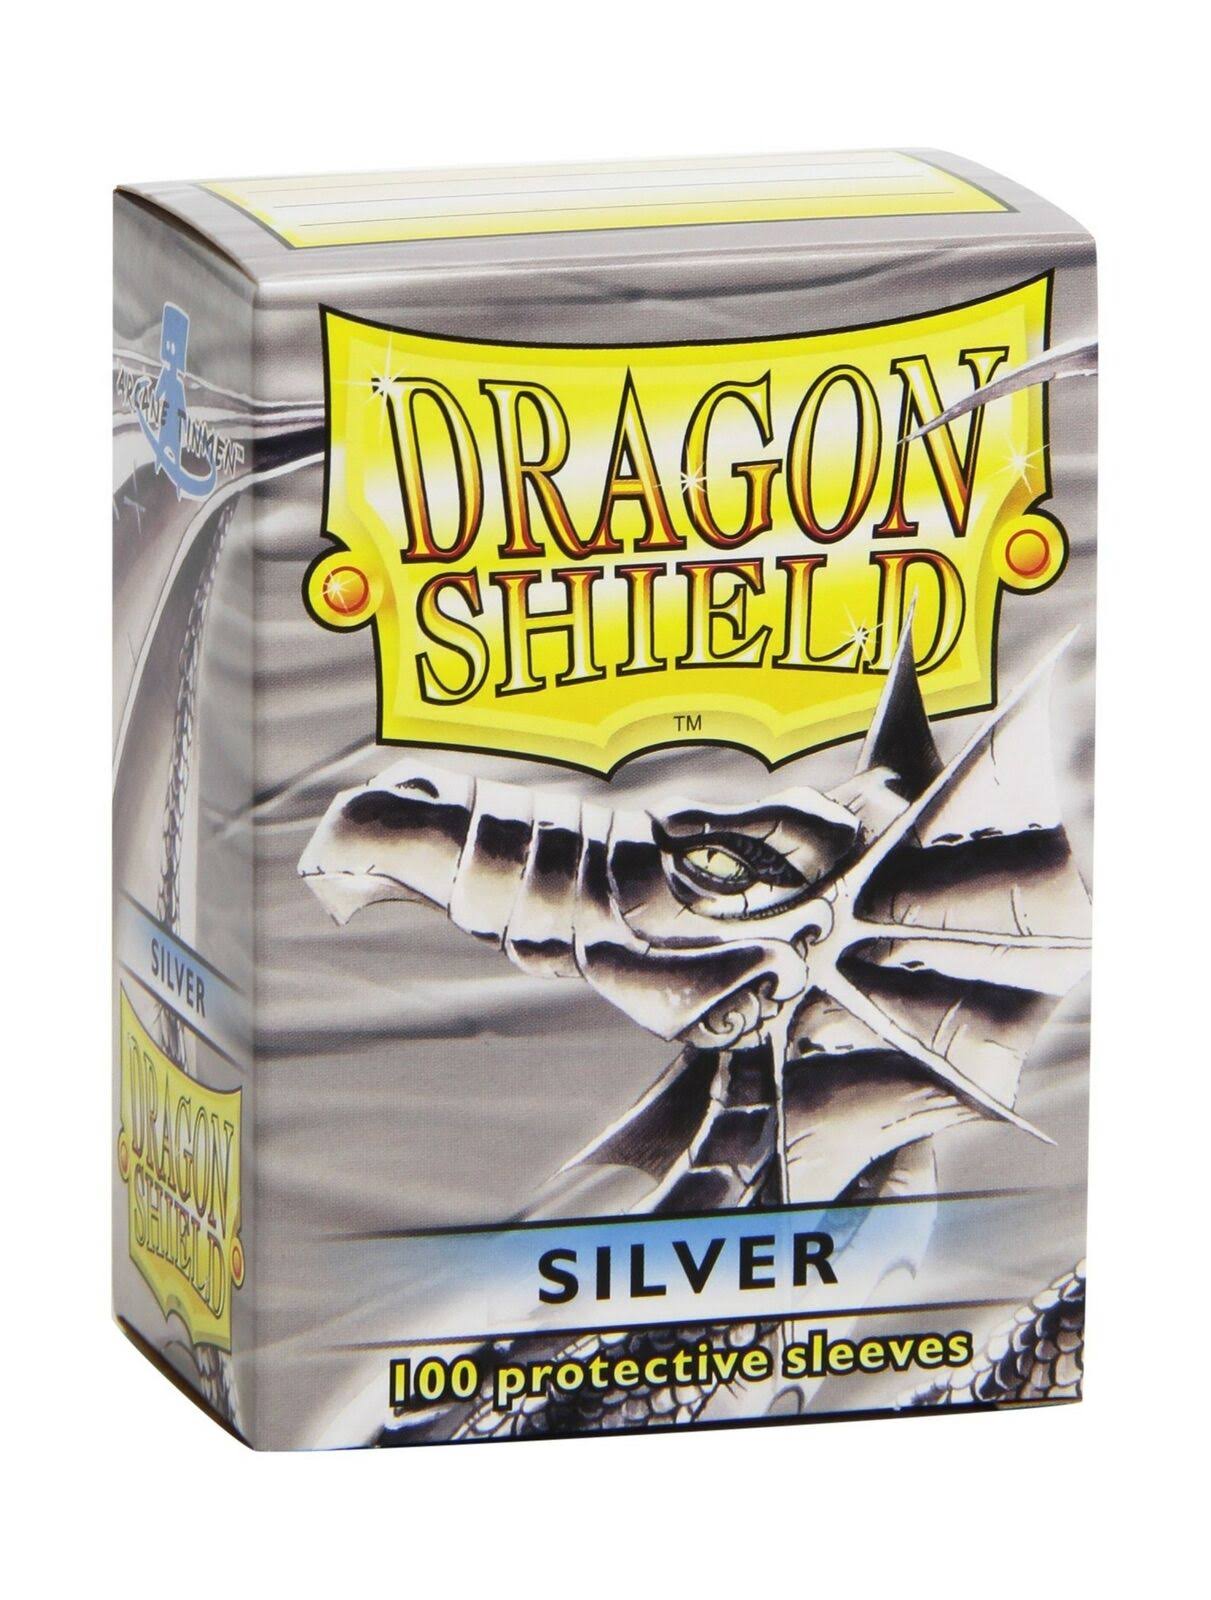 Dragon Shields Sleeves - Silver, 100 Protective Sleeves